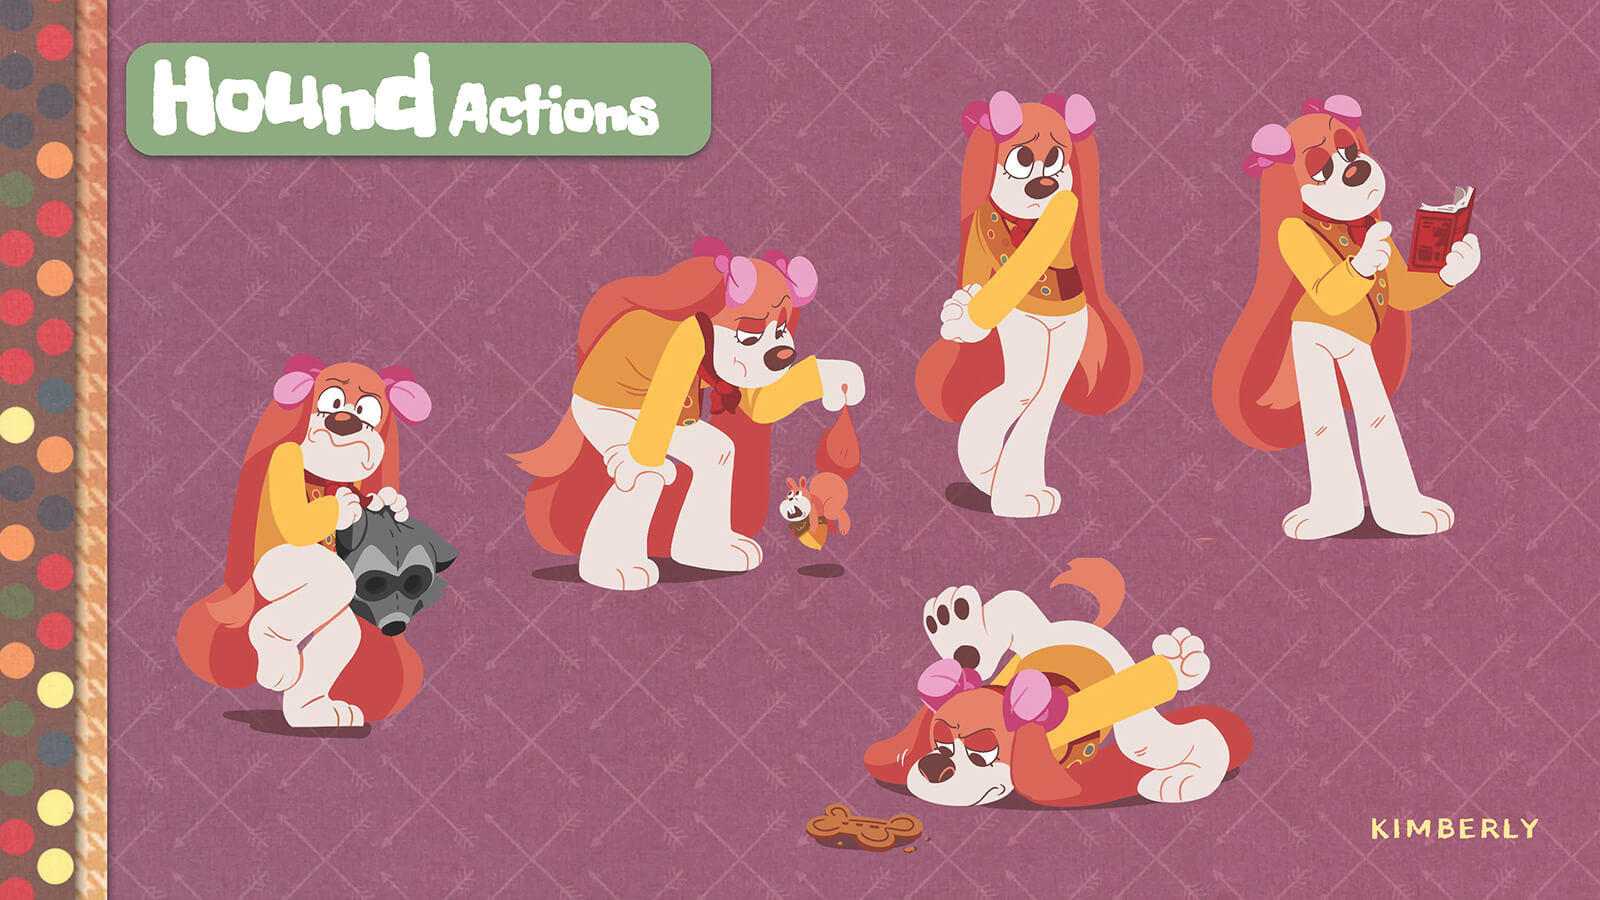 Sketches and examples of actions by the character Hound.